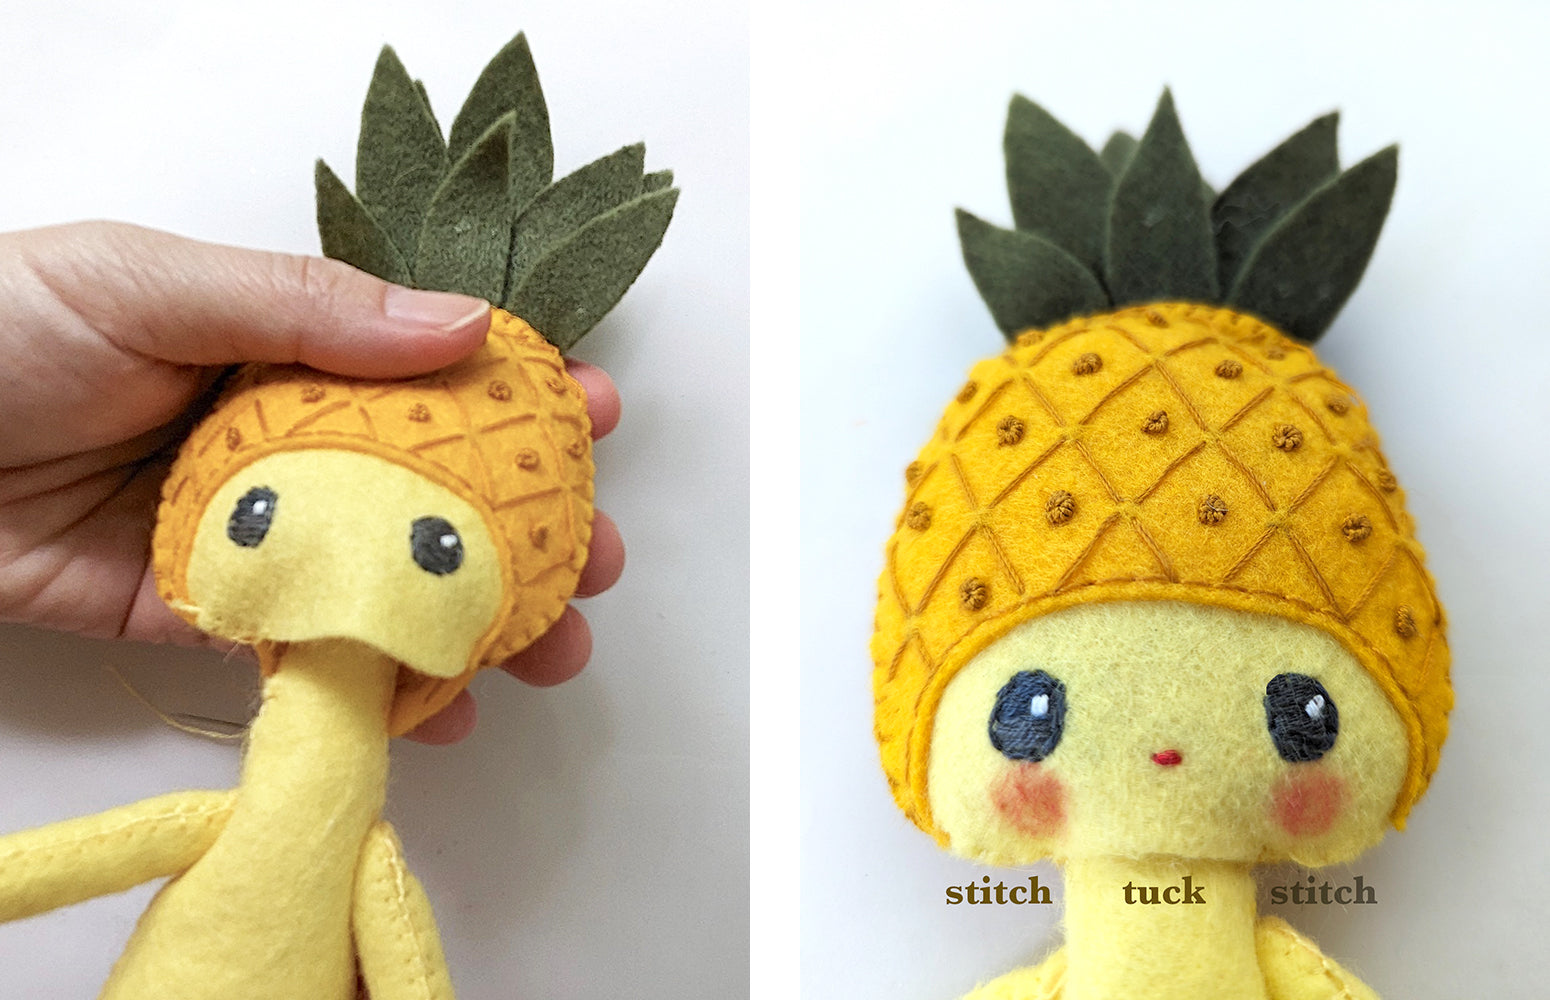 Attaching pineapple head to body